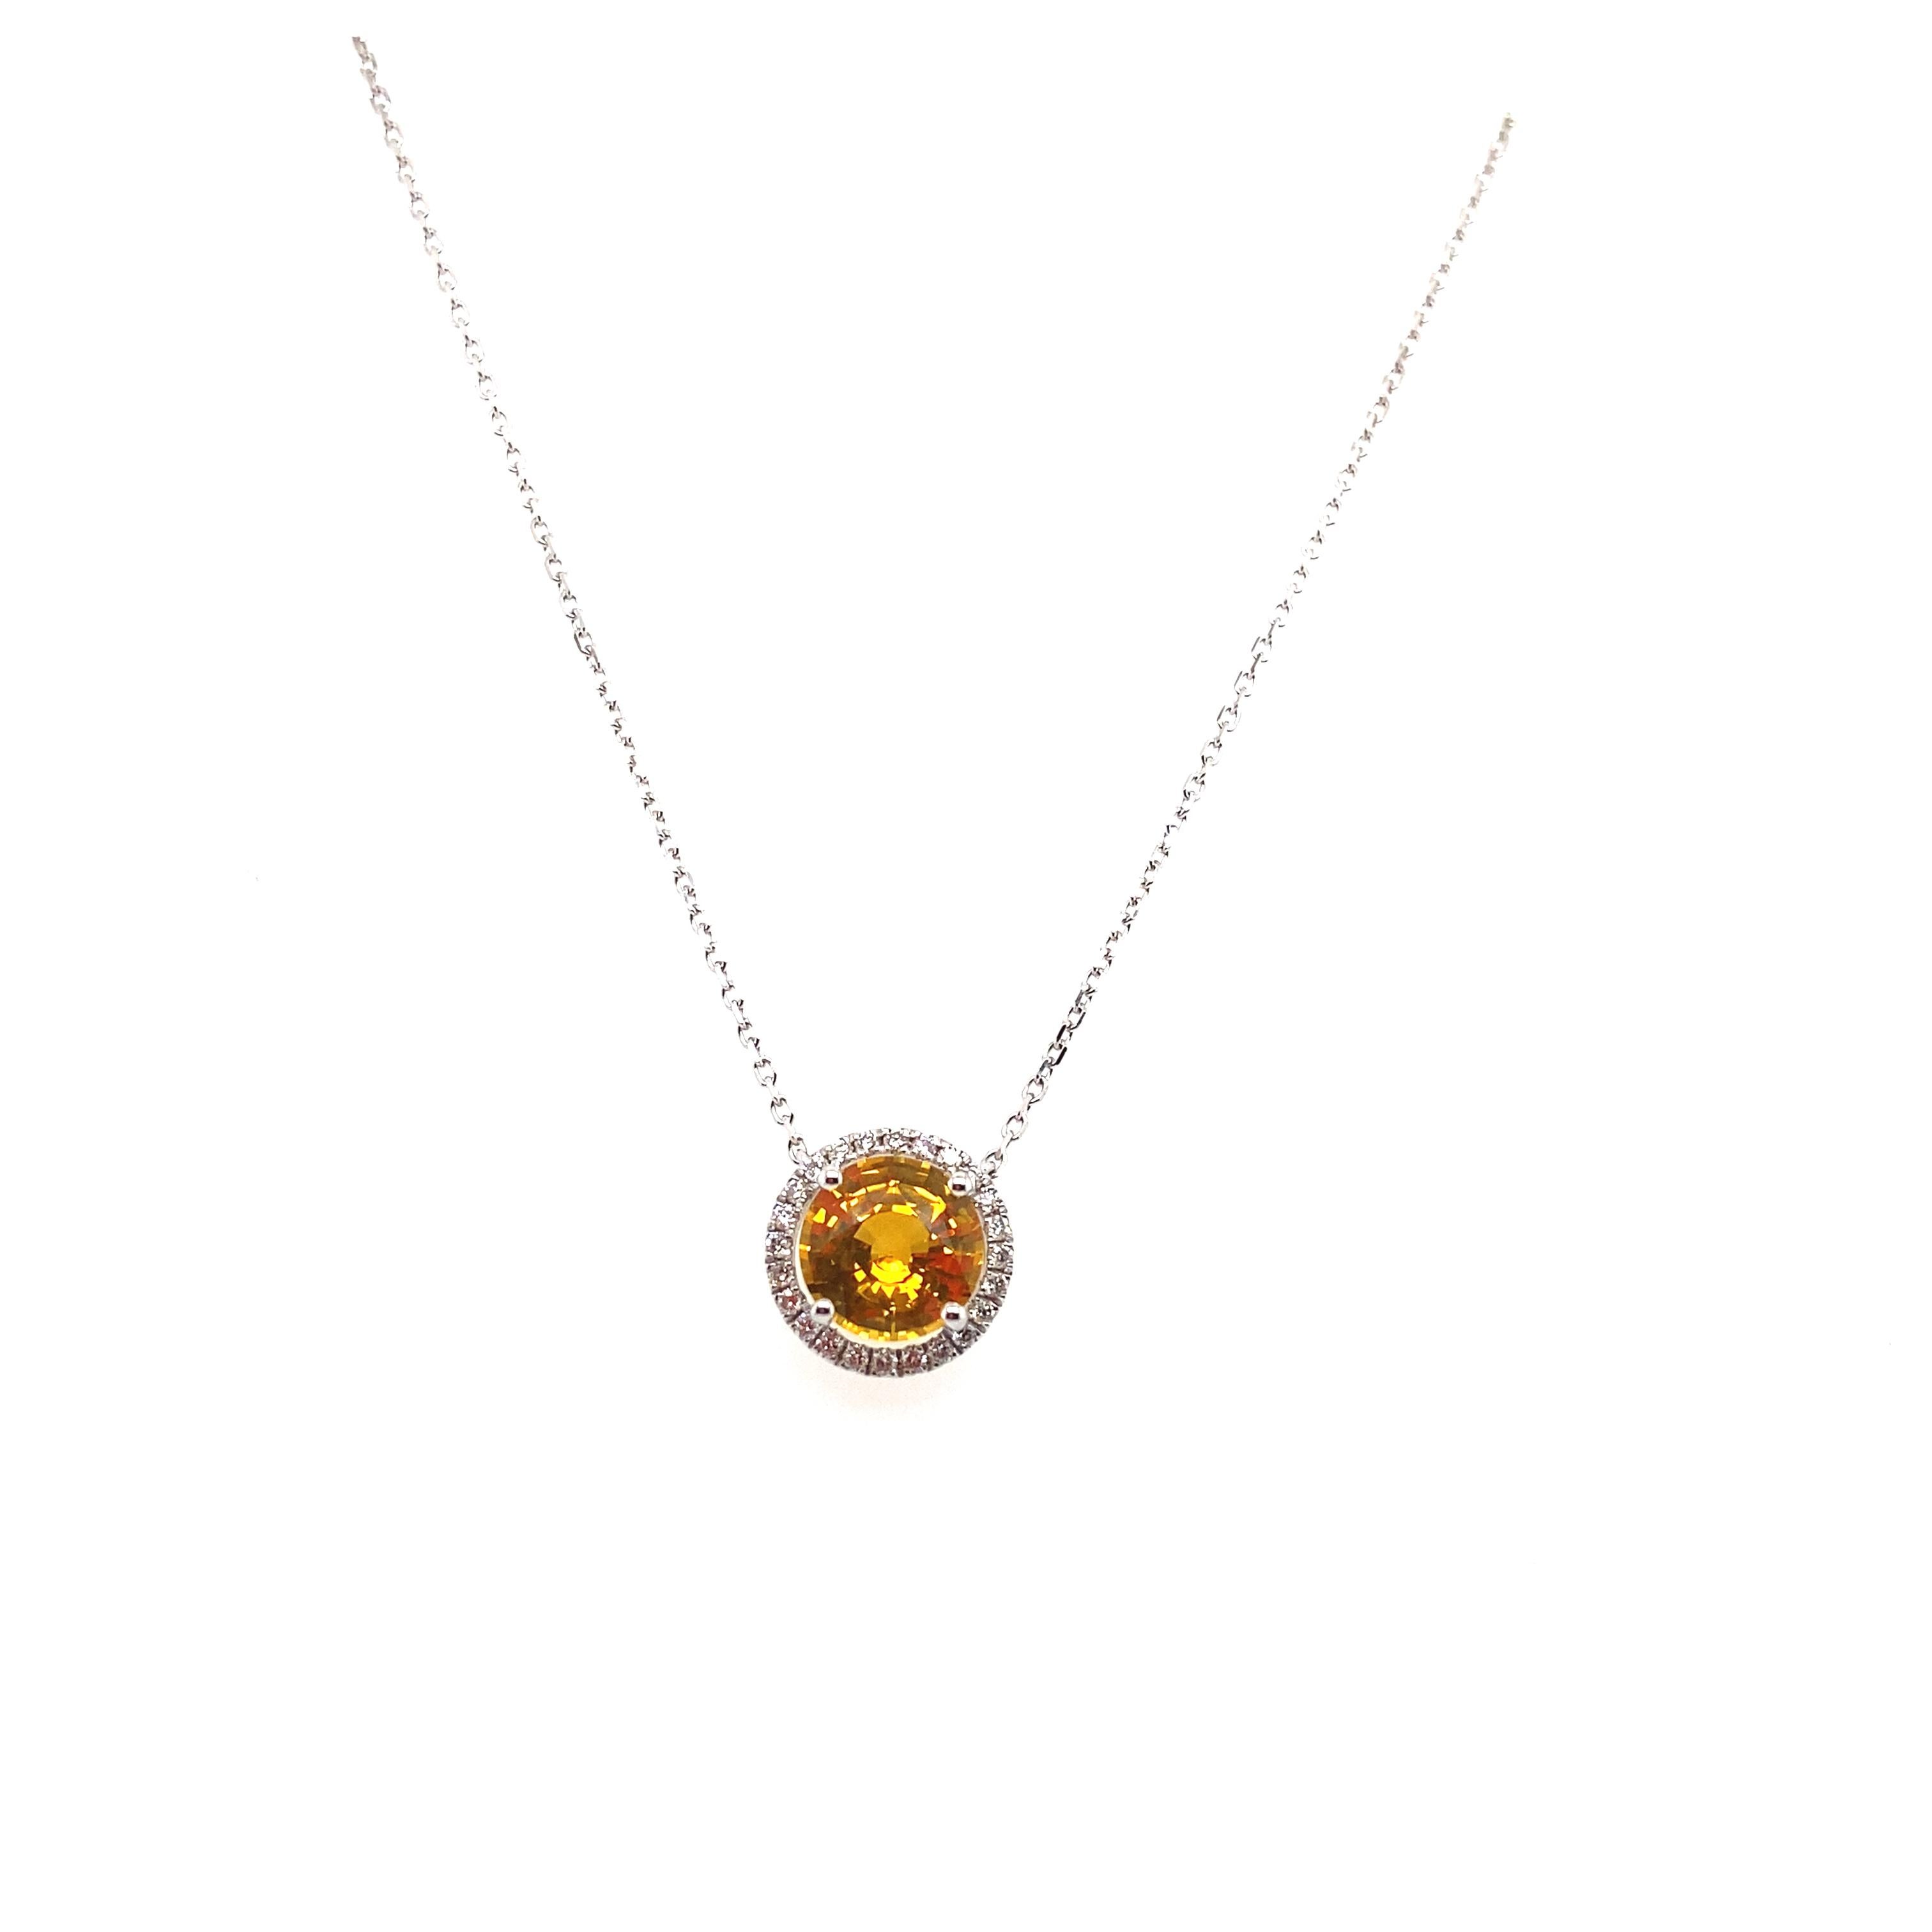 Contemporary 2.11 Carat Yellow Sapphire and Diamond Pendant Necklace For Sale